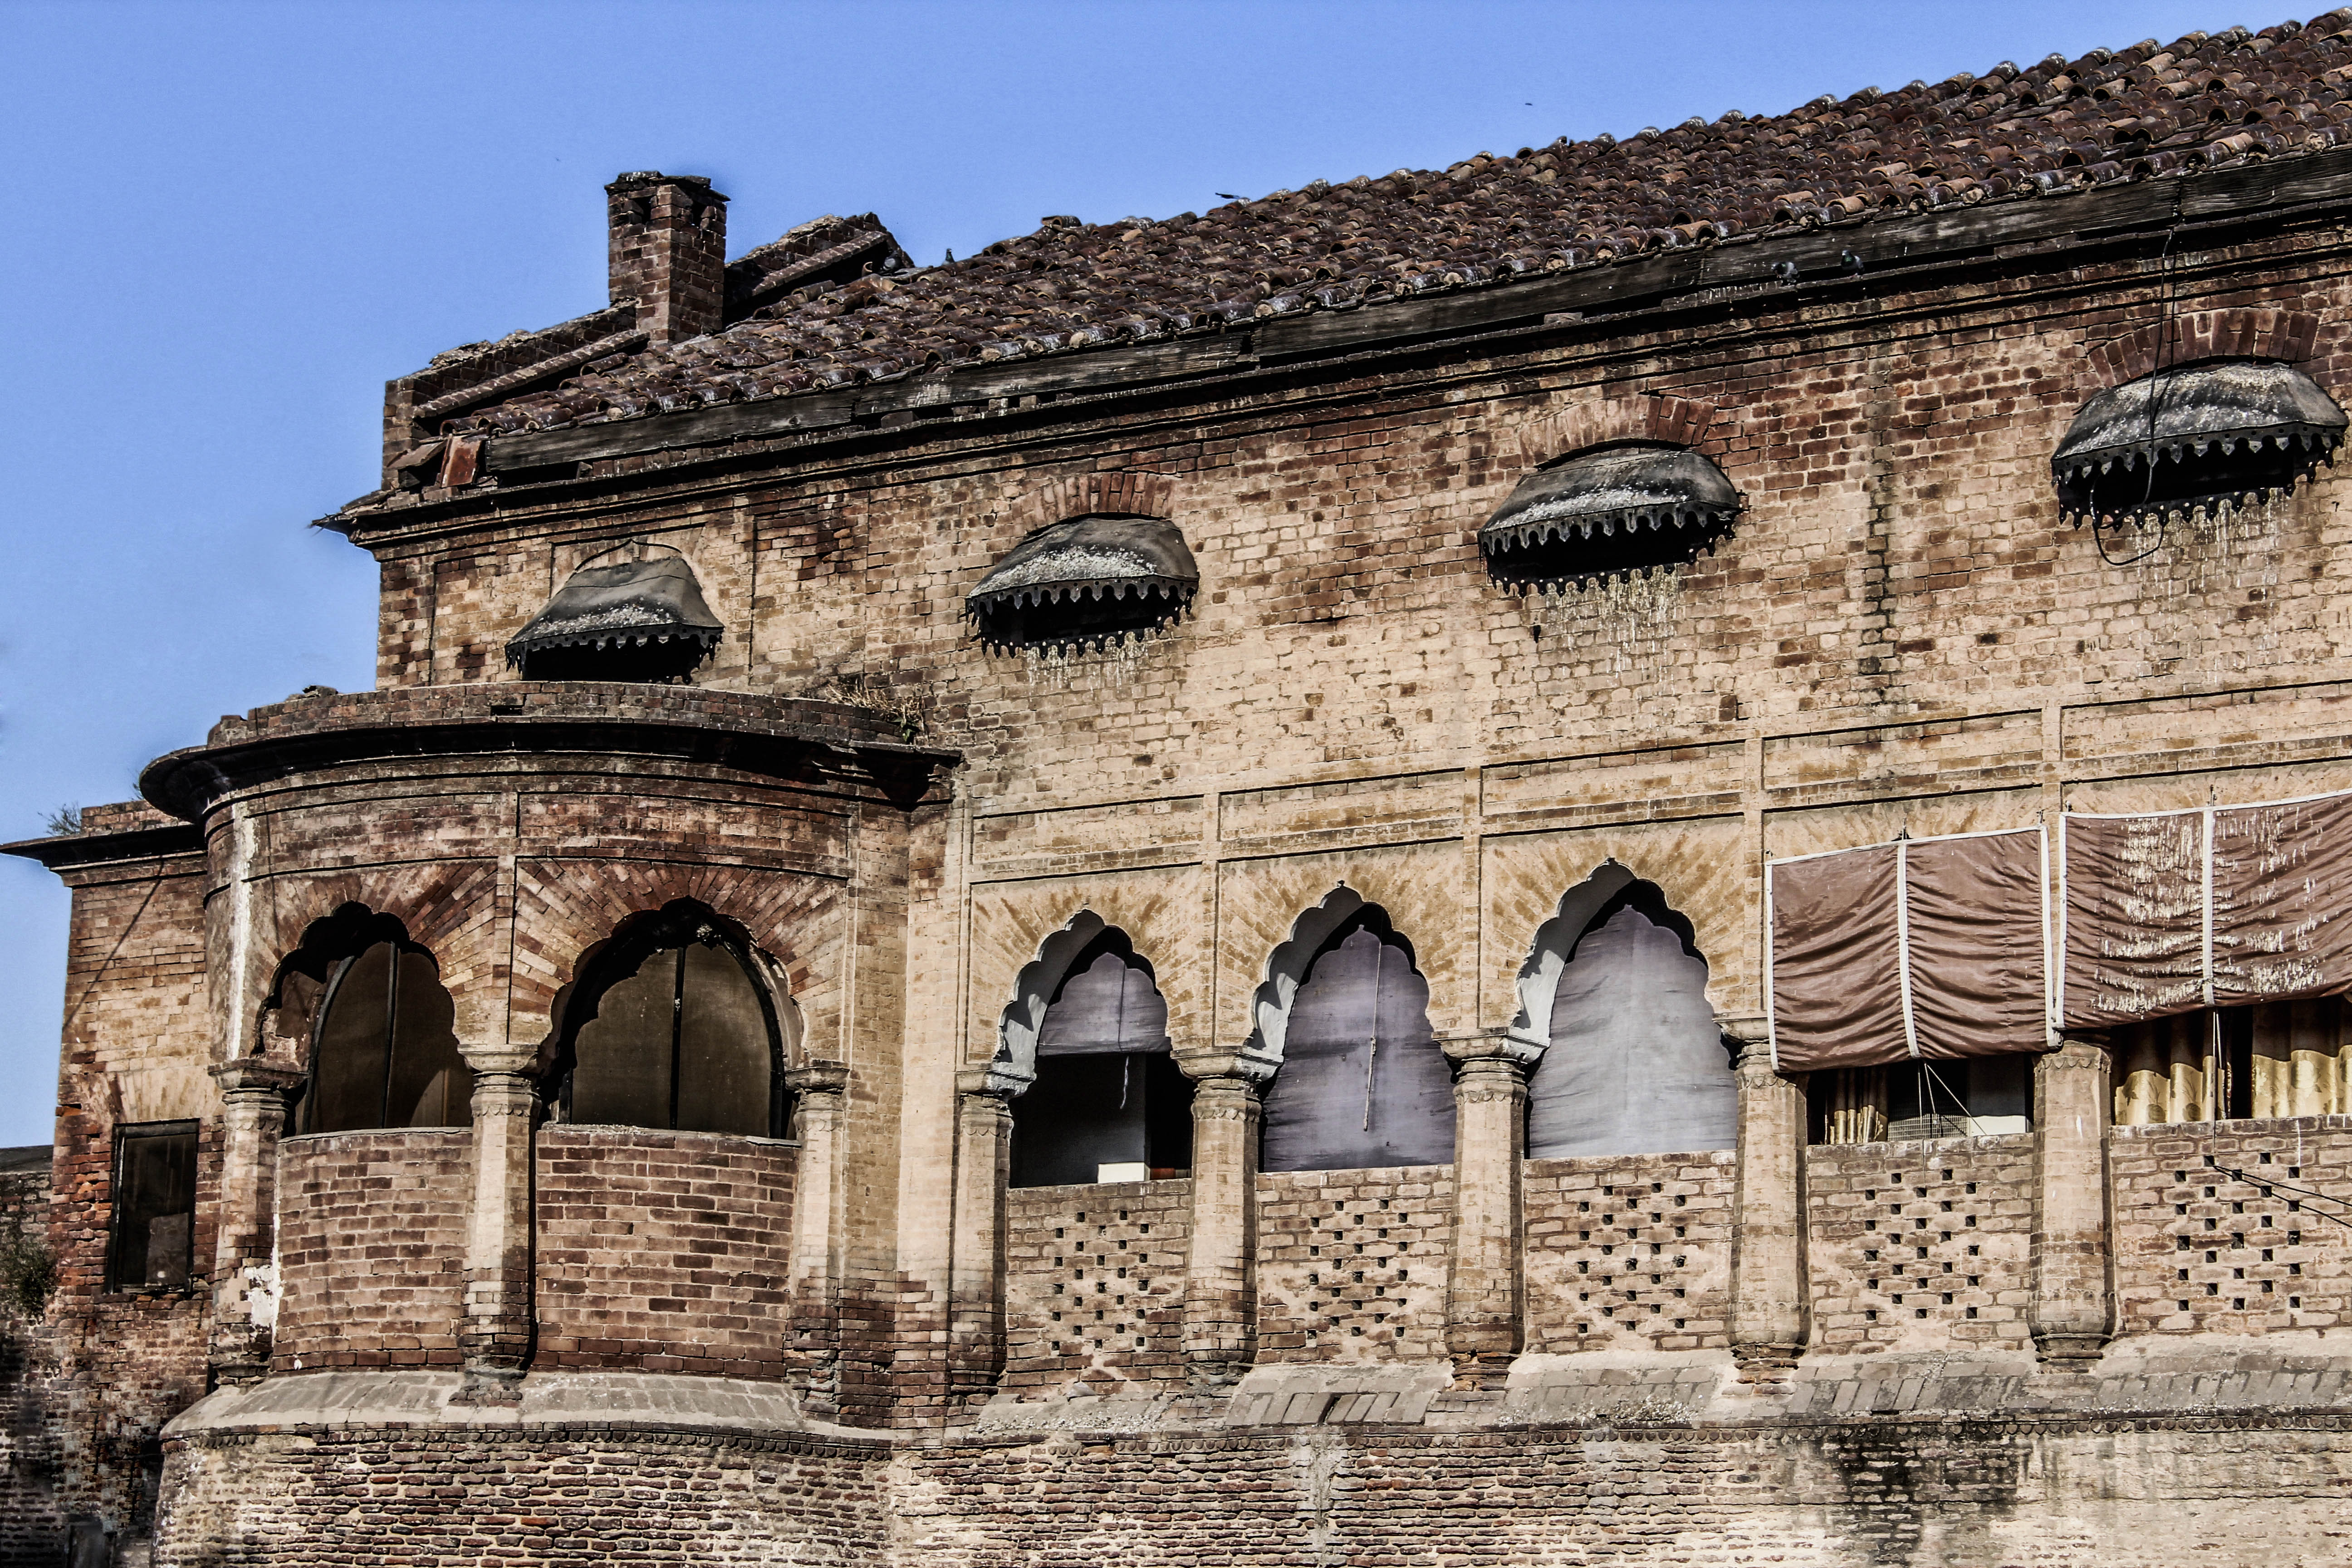 File:Old heritage building outside lahore fort.jpg - Wikimedia Commons